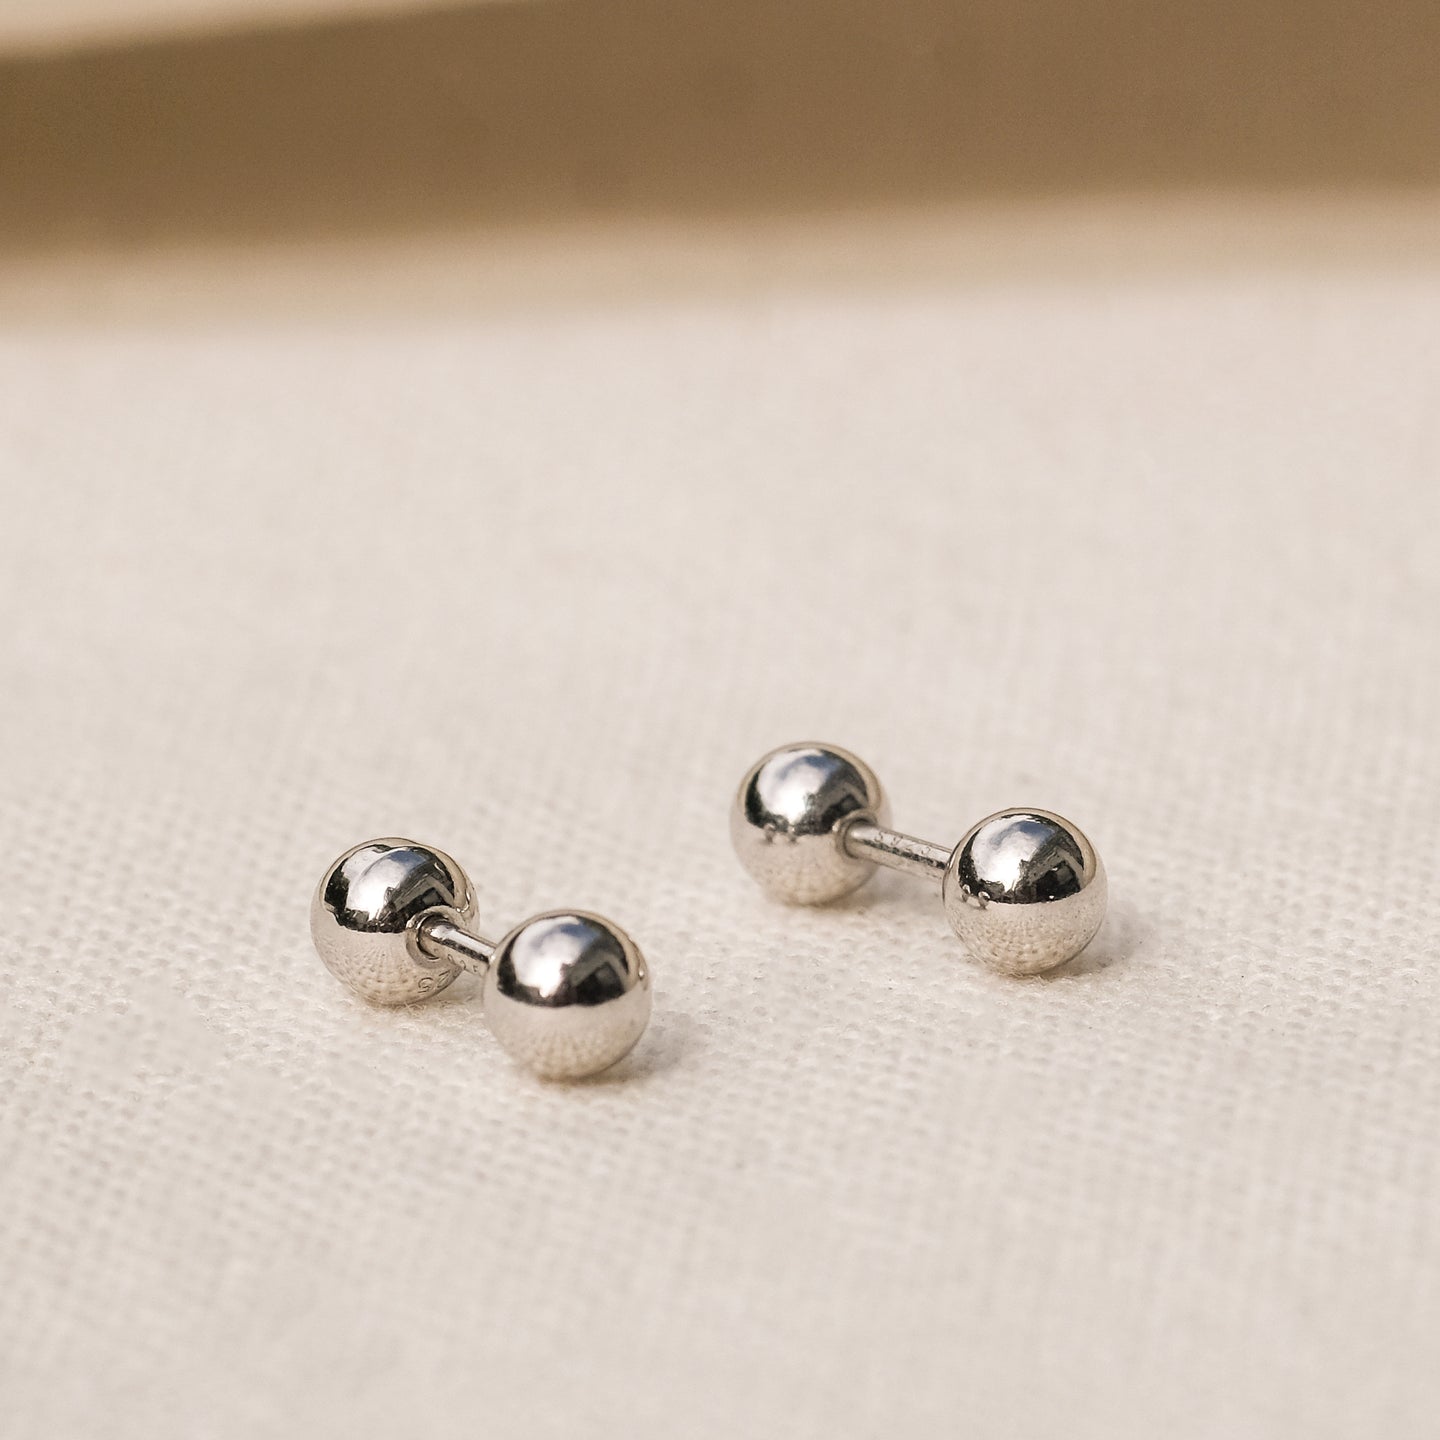 products/zoomed-hola-tiny-studs-925-sterling-silver-1.jpg